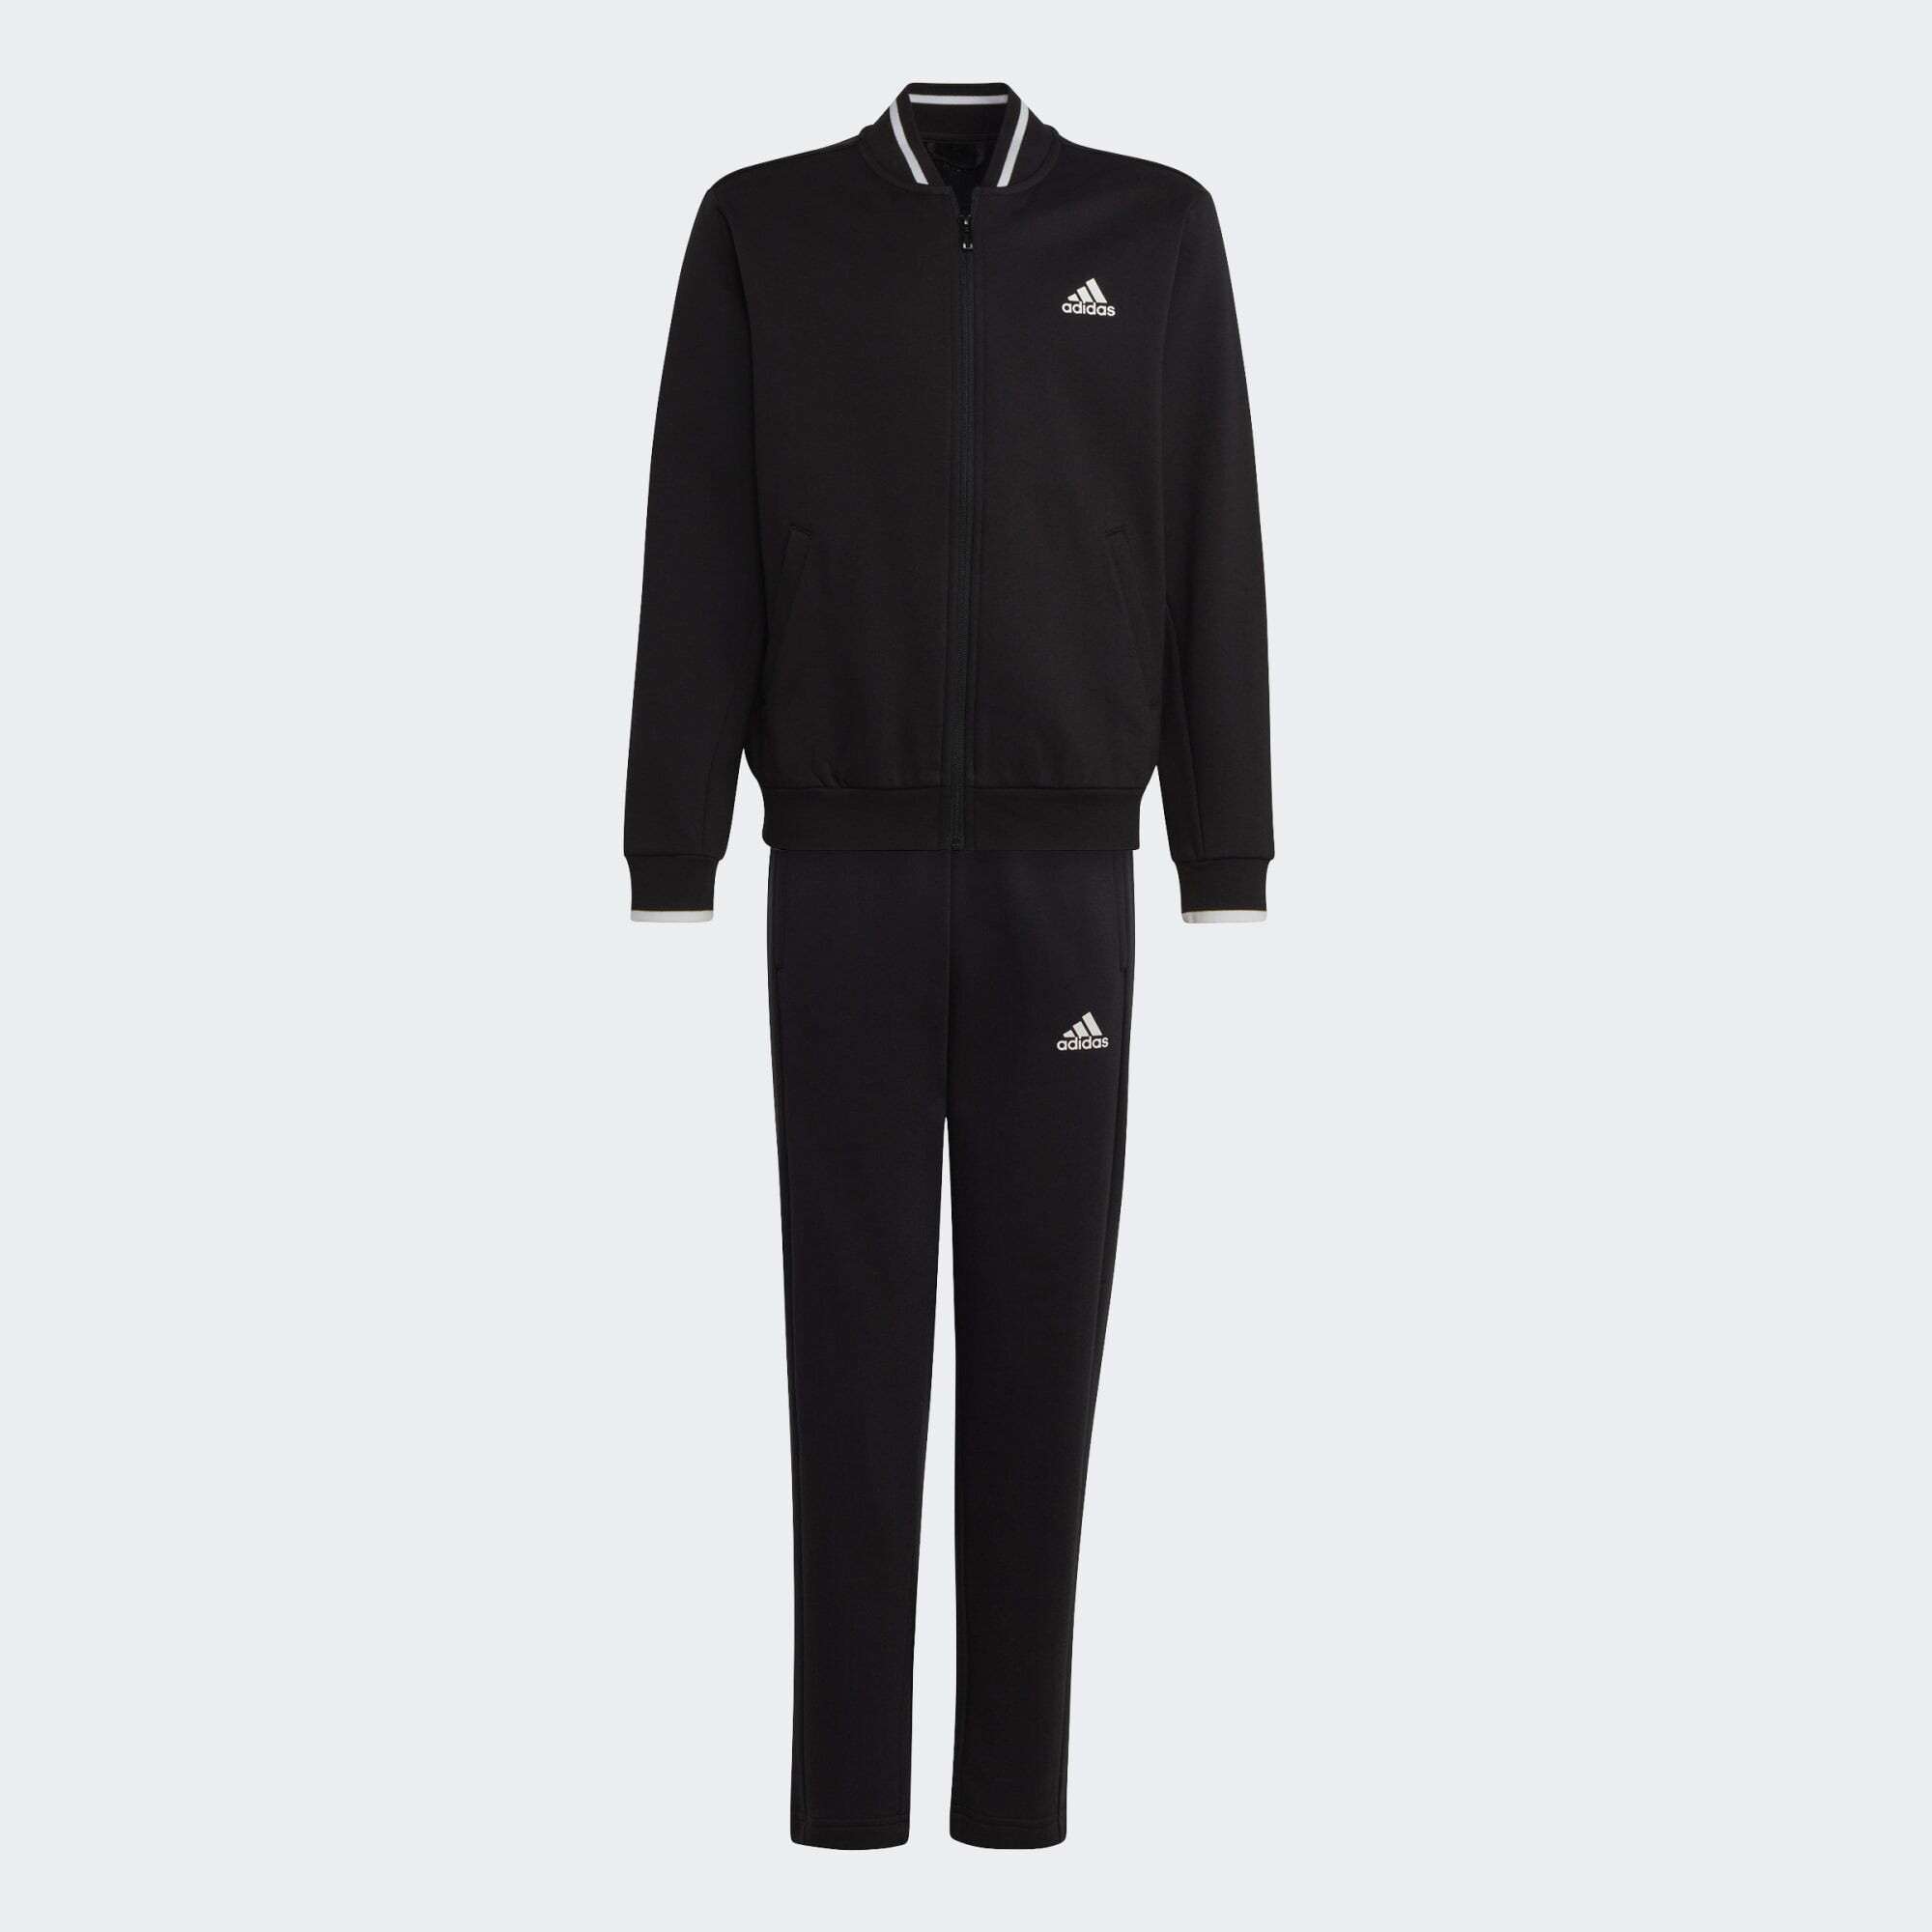 adidas Together Back to School AEROREADY Track Suit (9000127316_22872)